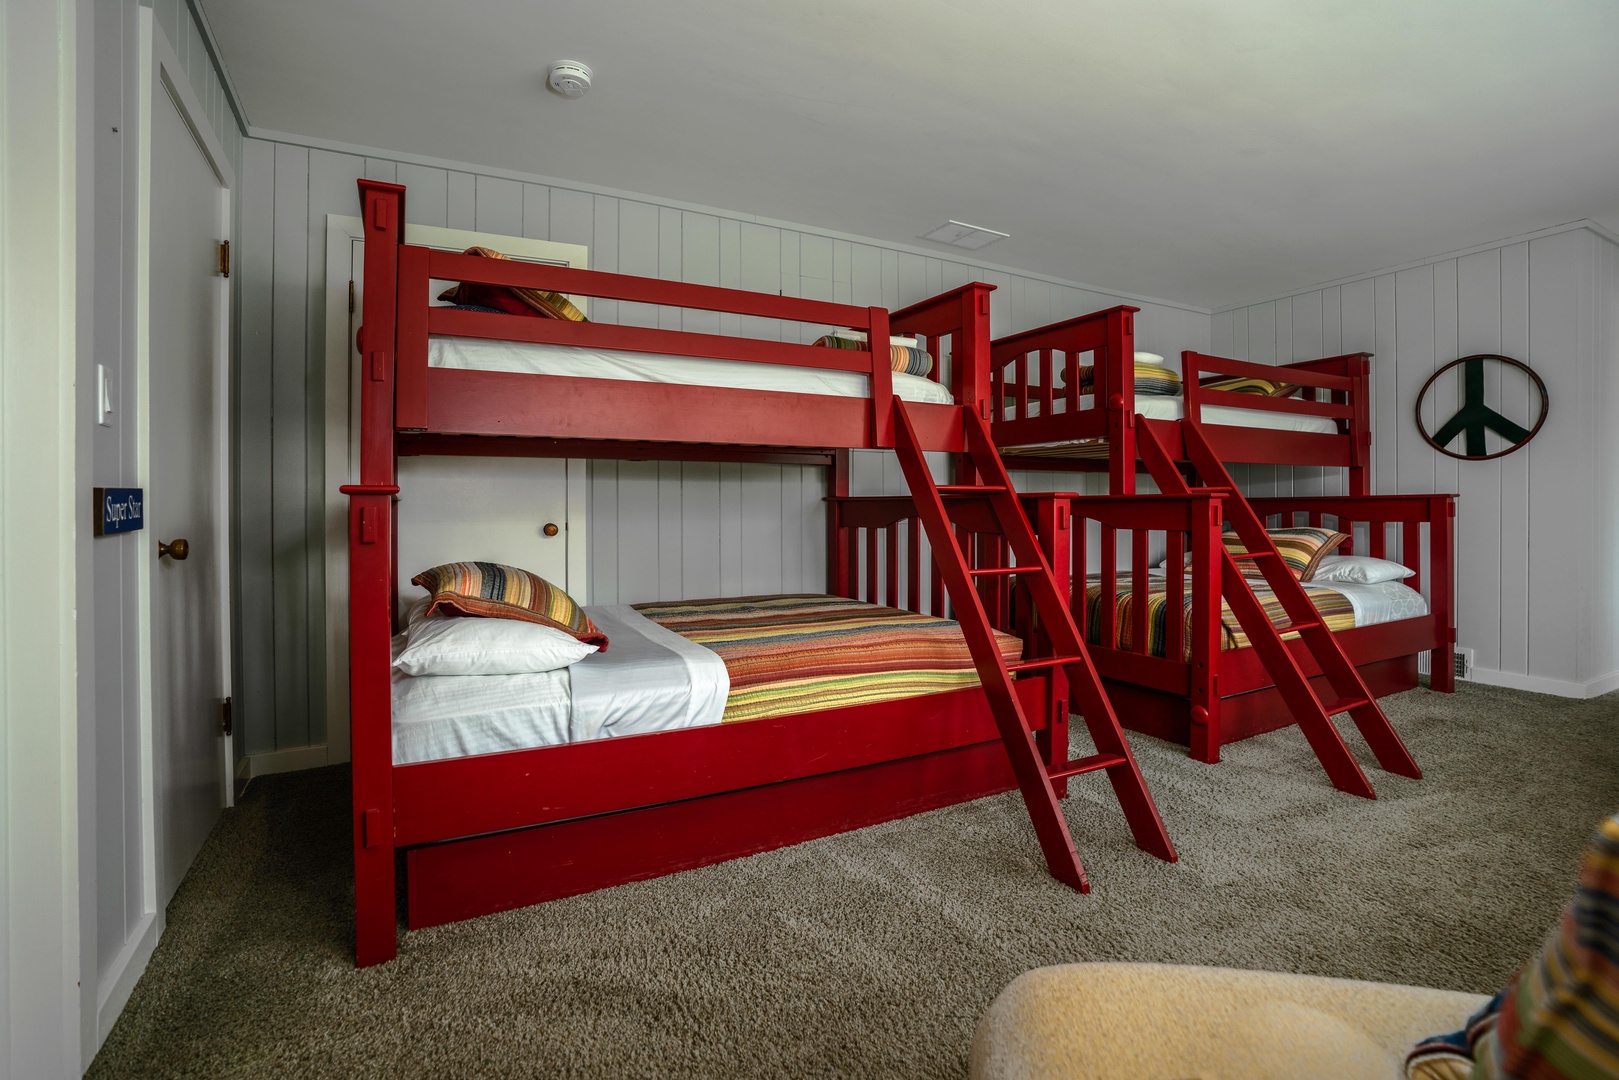 Fun sleeping arrangements for kids or small groups